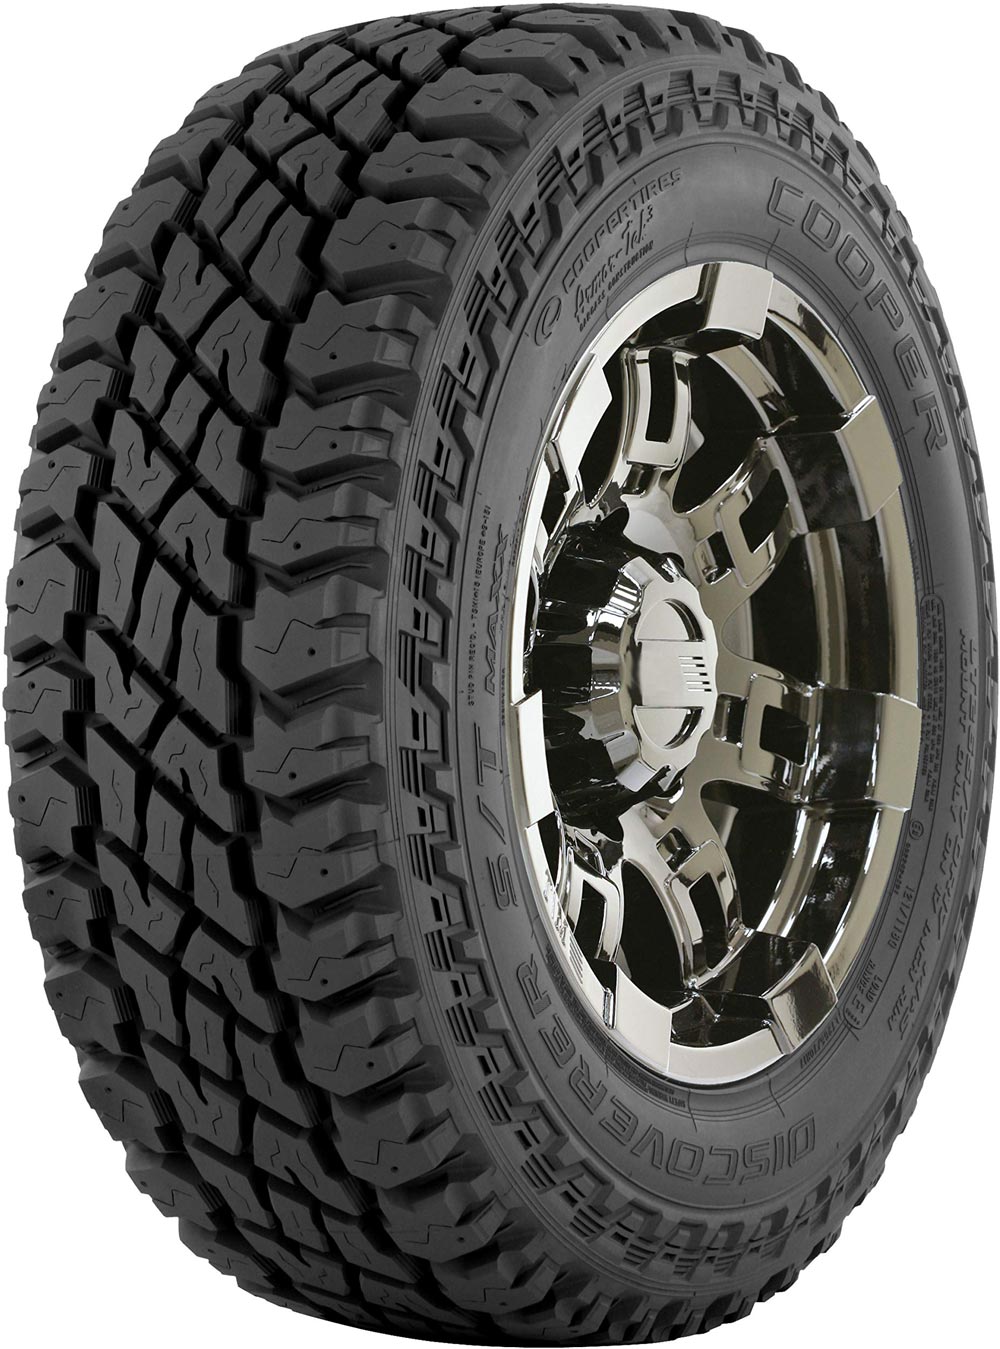 COOPER DISCOVERER ST MAXX P O BSW 305/60 R18 121Q